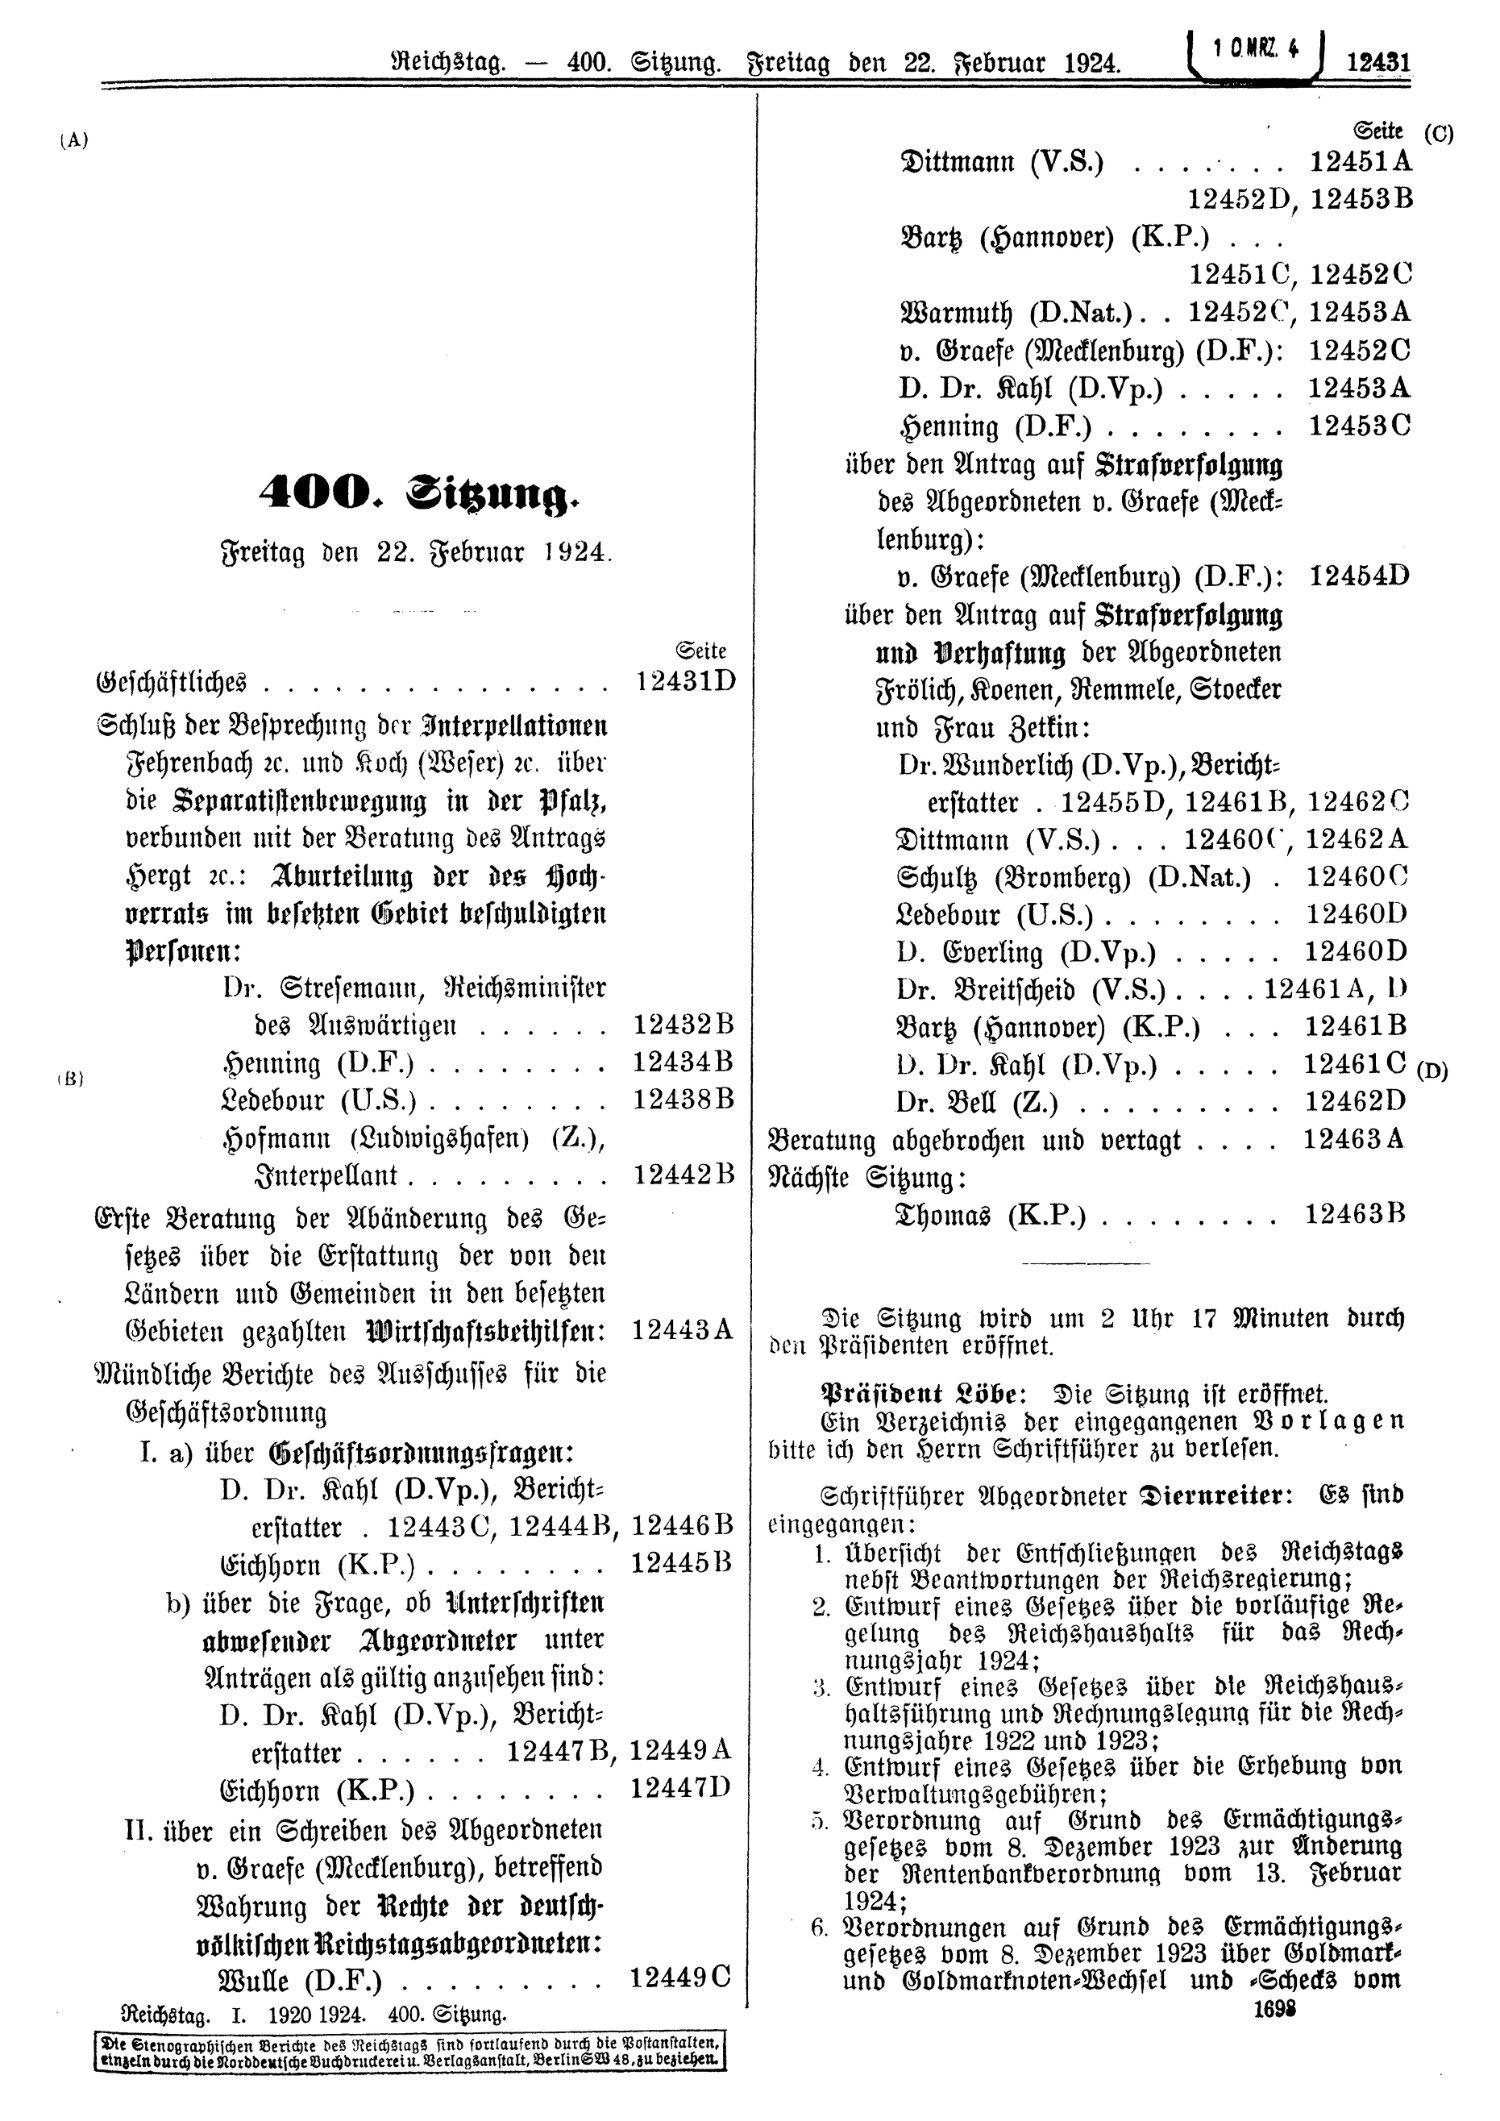 Scan of page 12431